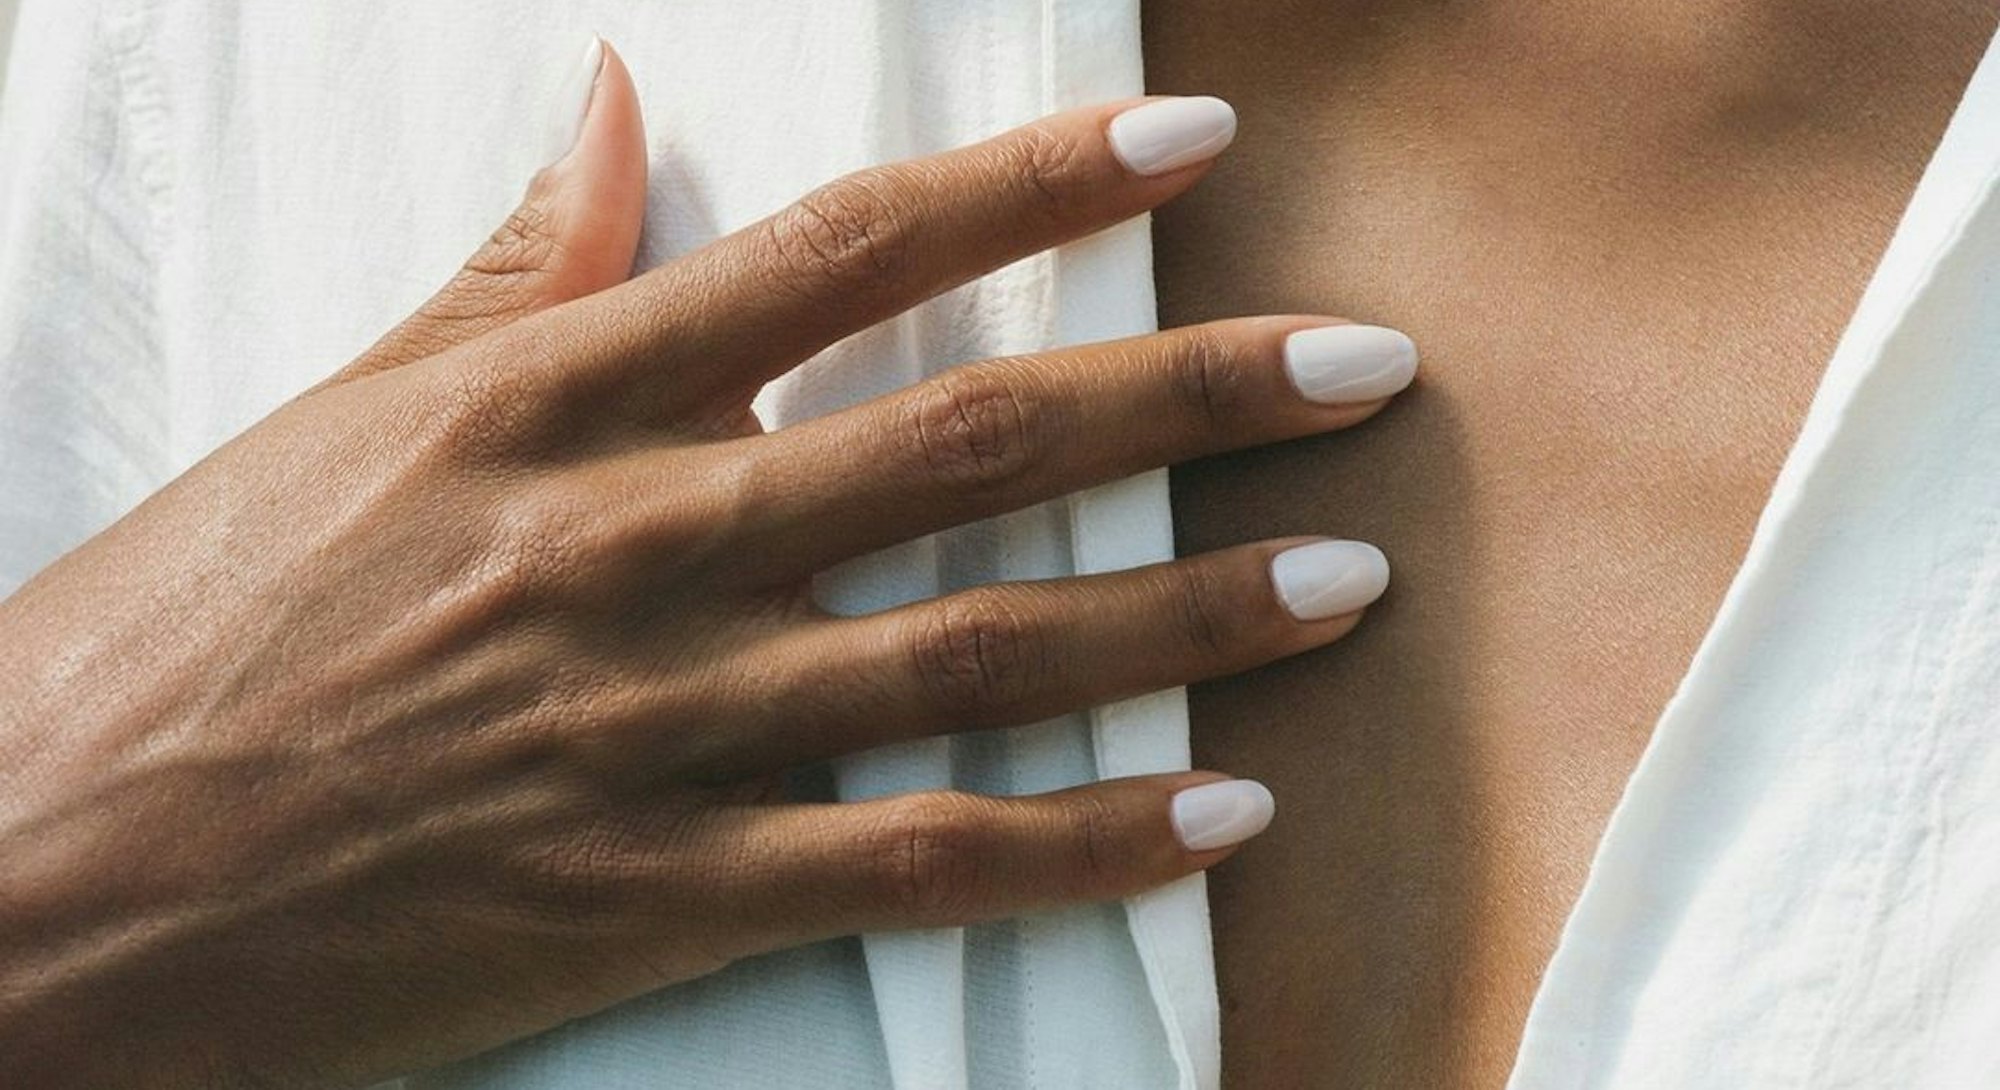 Libra season 2022 is here. Check out these heavenly, minimalistic nail art design ideas for manicure...